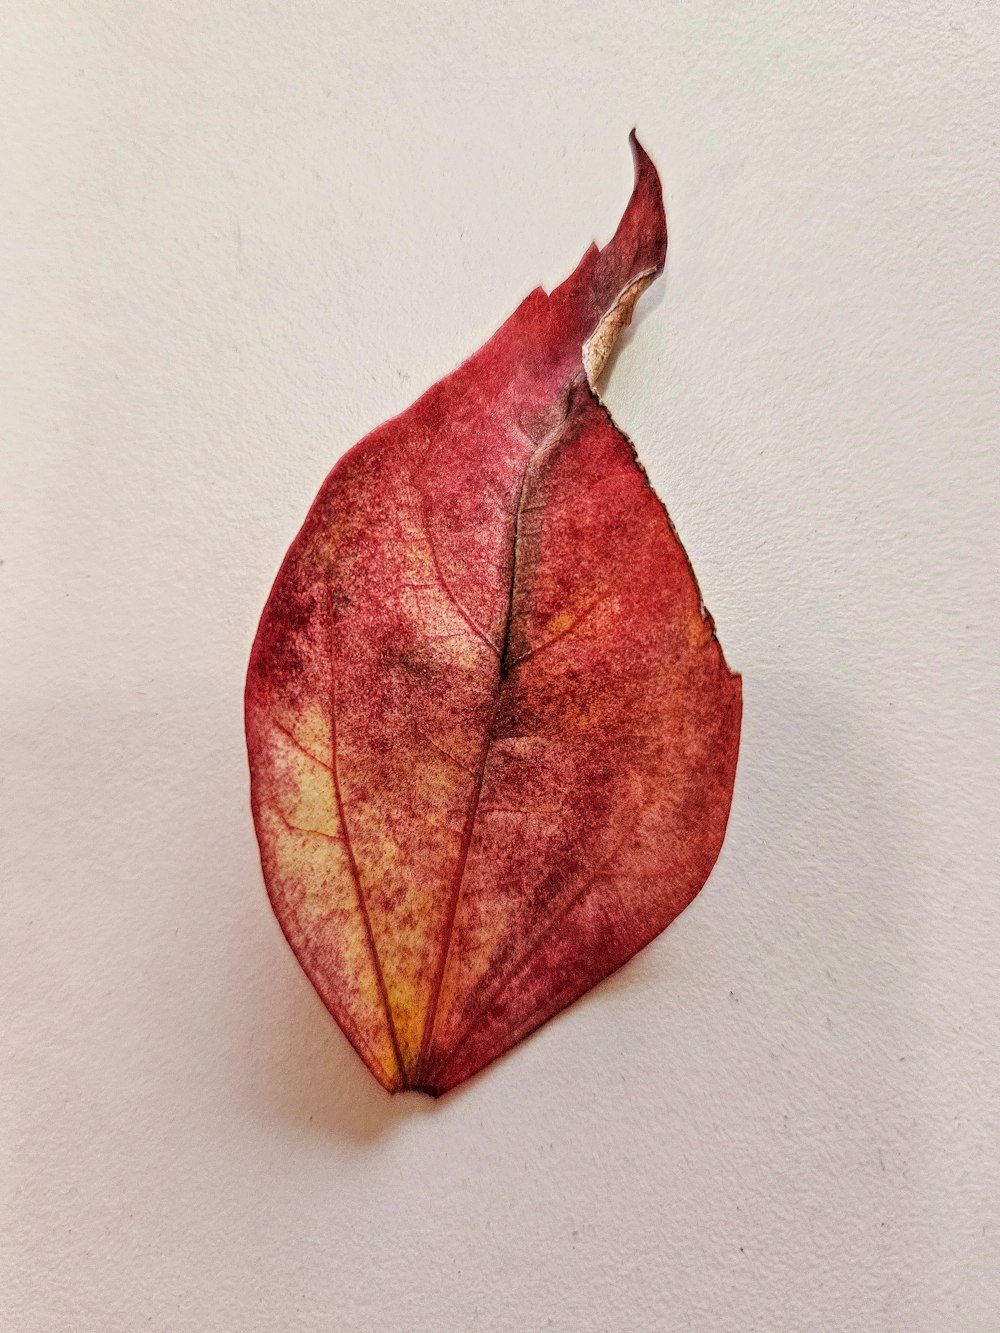 a single red leaf on a white surface